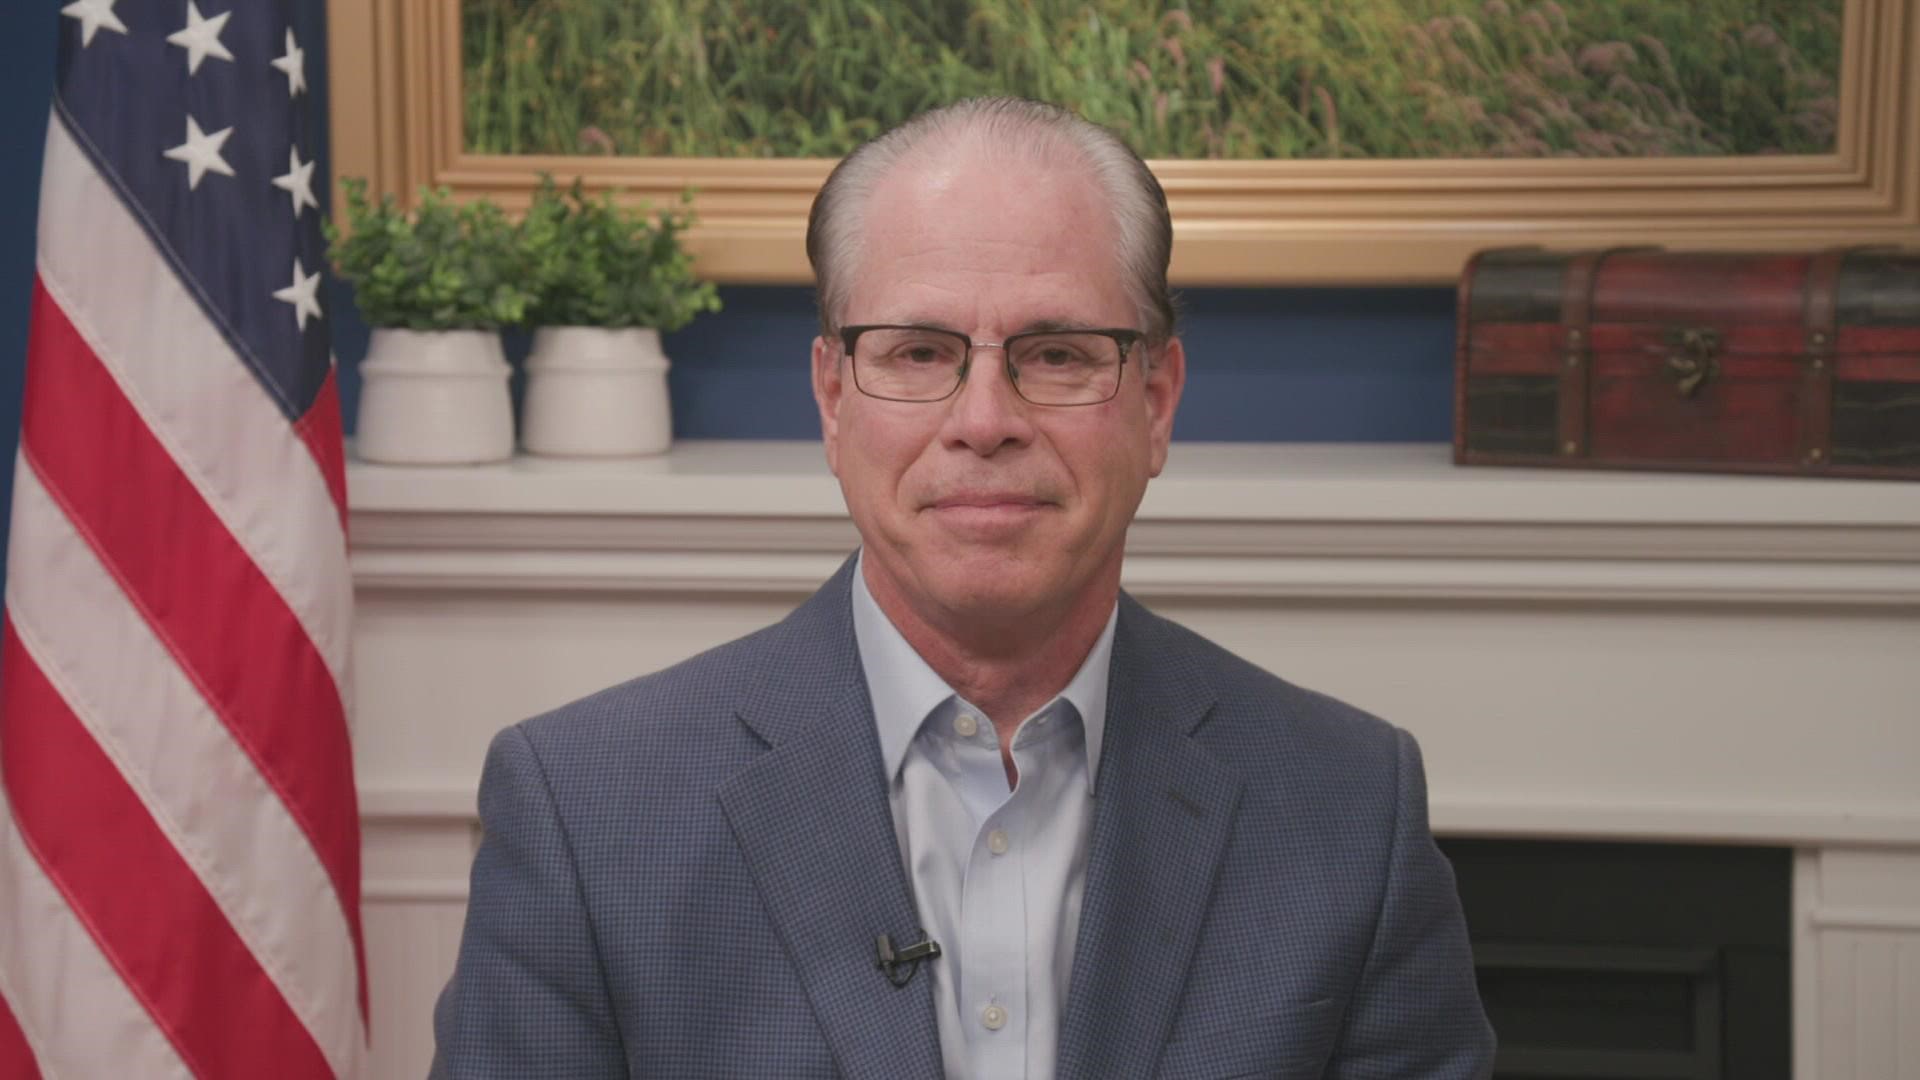 Sen. Mike Braun, R-Ind., spoke with reporters in a video conference call Tuesday, March 22, 2022.